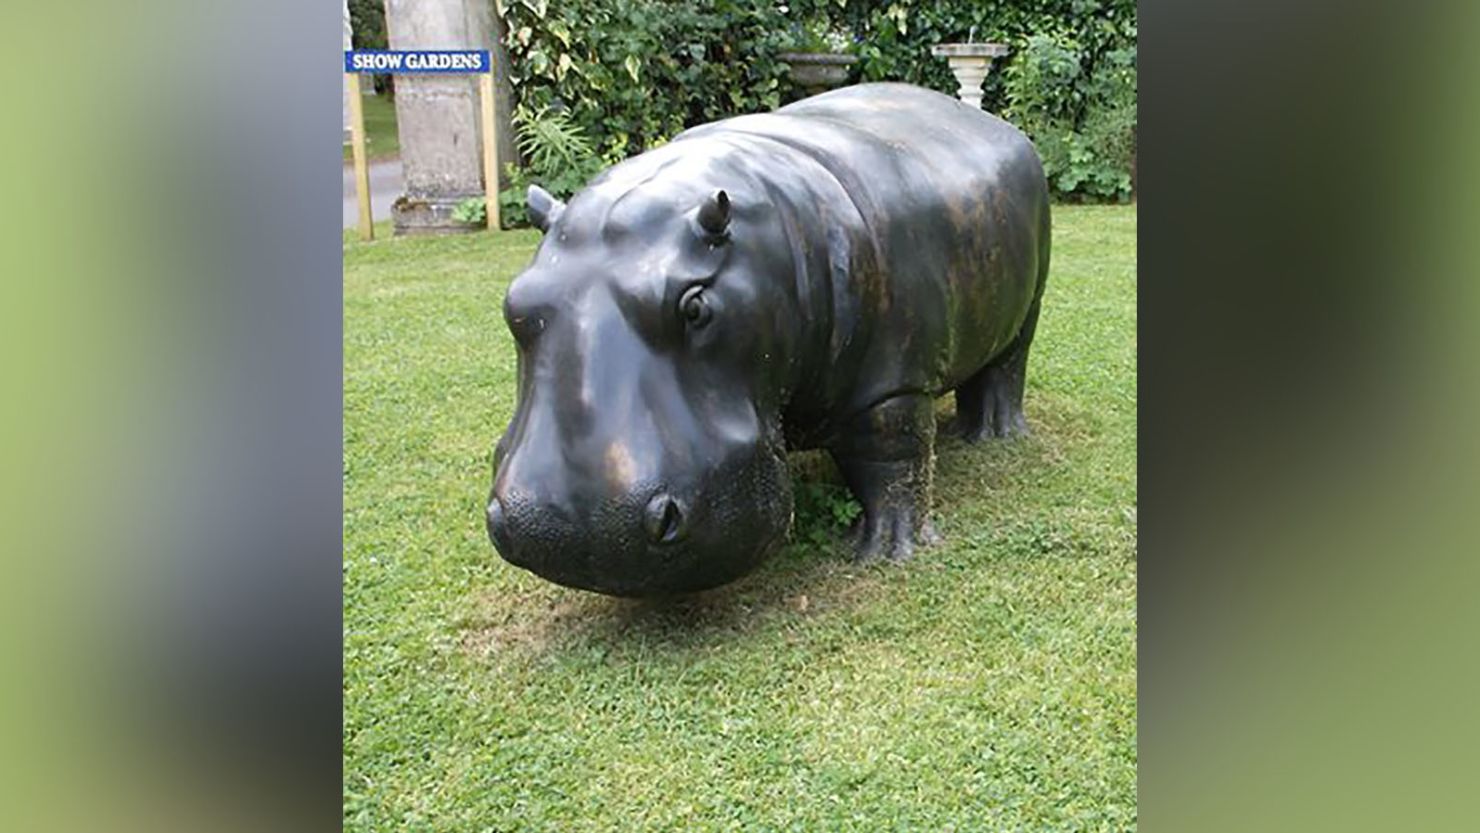 This giant bronze hippo was reported stolen from Chilstone Garden Ornaments in Tunbridge Wells, United Kingdom. 